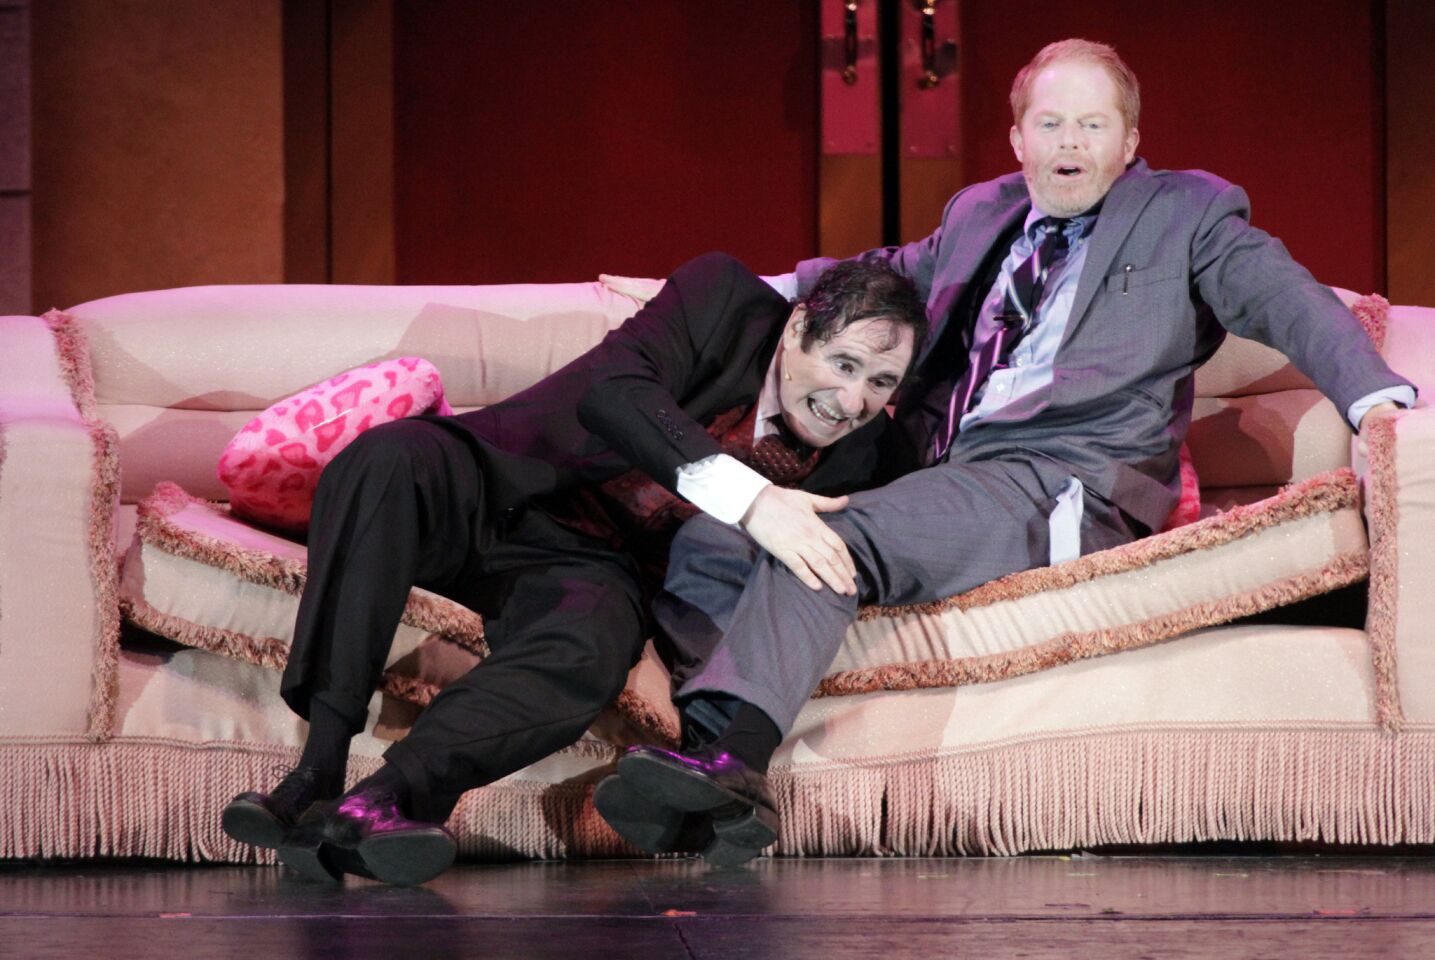 Jesse Tyler Ferguson, right, as Leo Bloom and Richard Kind as Max Bialystock in Mel Brooks' musical "The Producers" at the Hollywood Bowl on July 27, 2012. More: Jesse Tyler Ferguson takes on 'The Producers' at the Bowl | Review | Photos